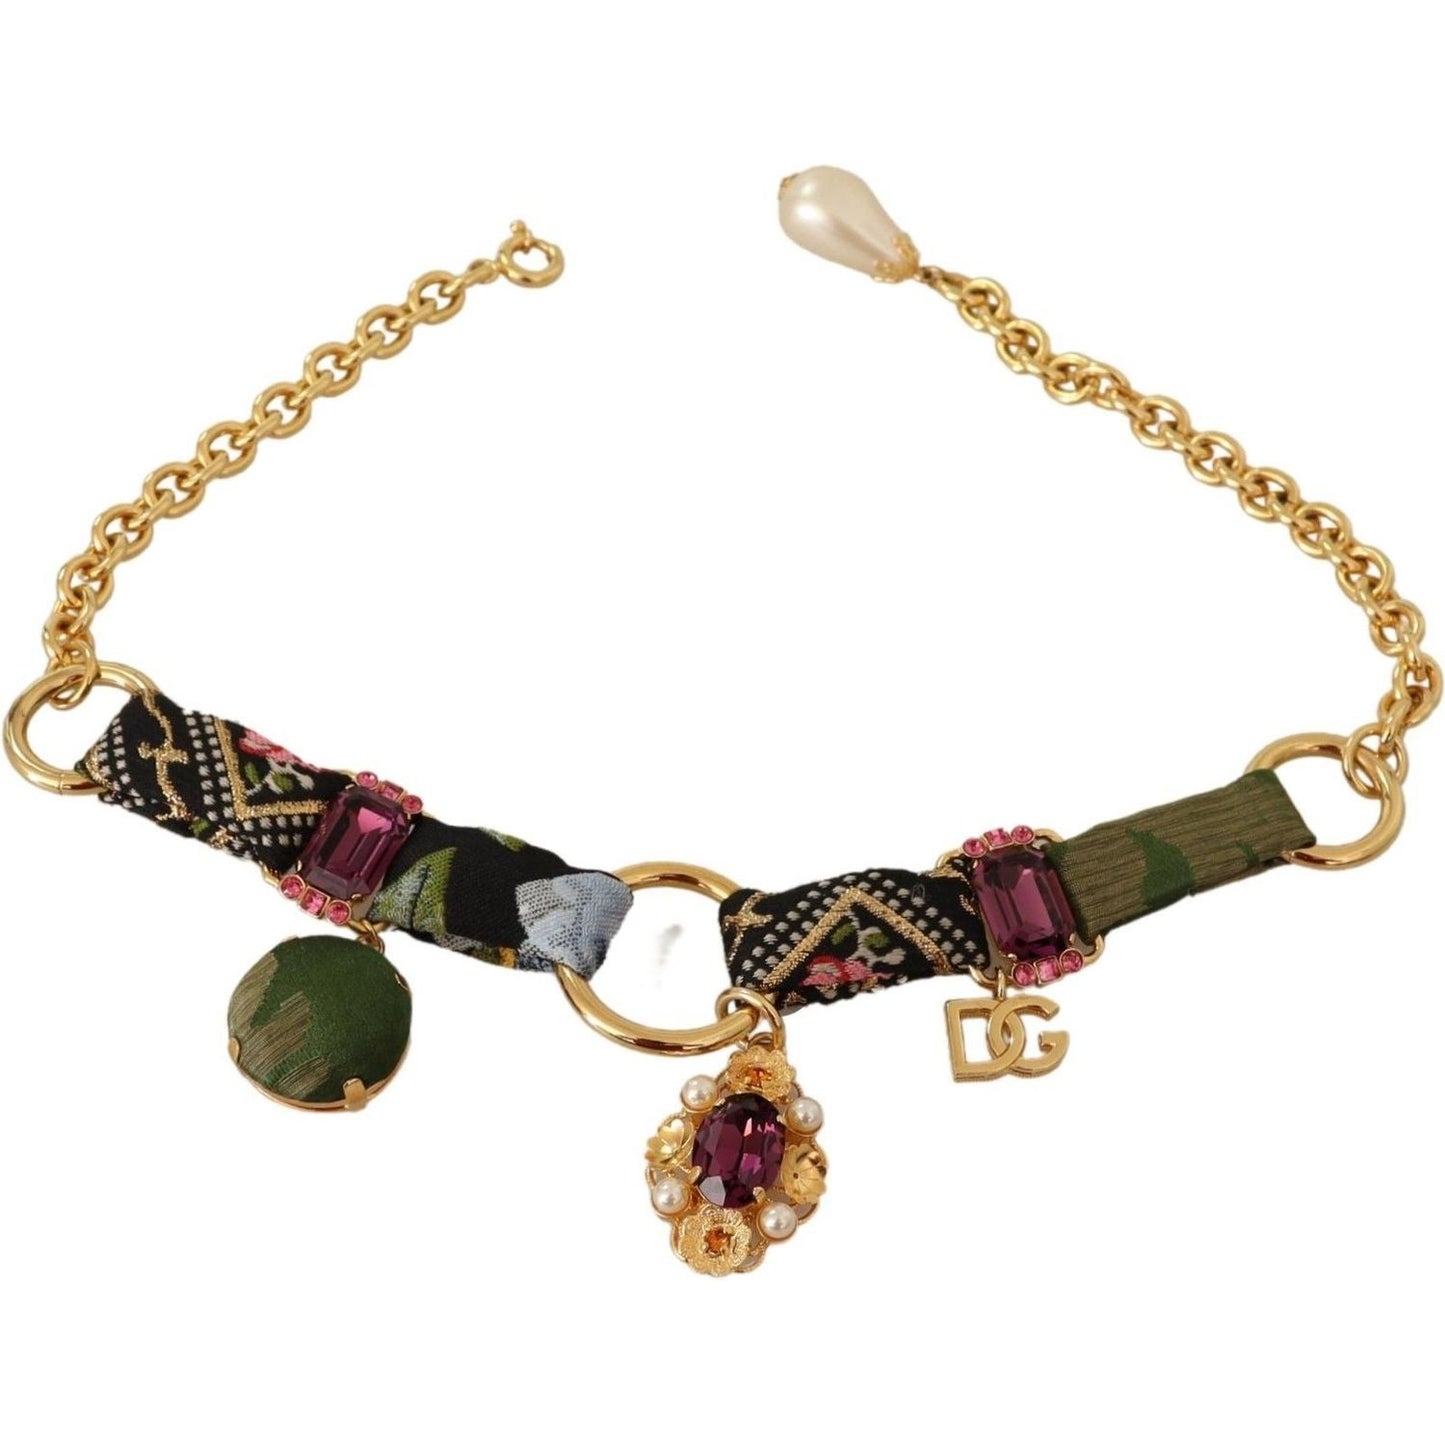 Dolce & Gabbana Multicolor Crystal Charm Necklace WOMAN NECKLACE gold-tone-brass-fabric-crystals-women-jewelry-necklace